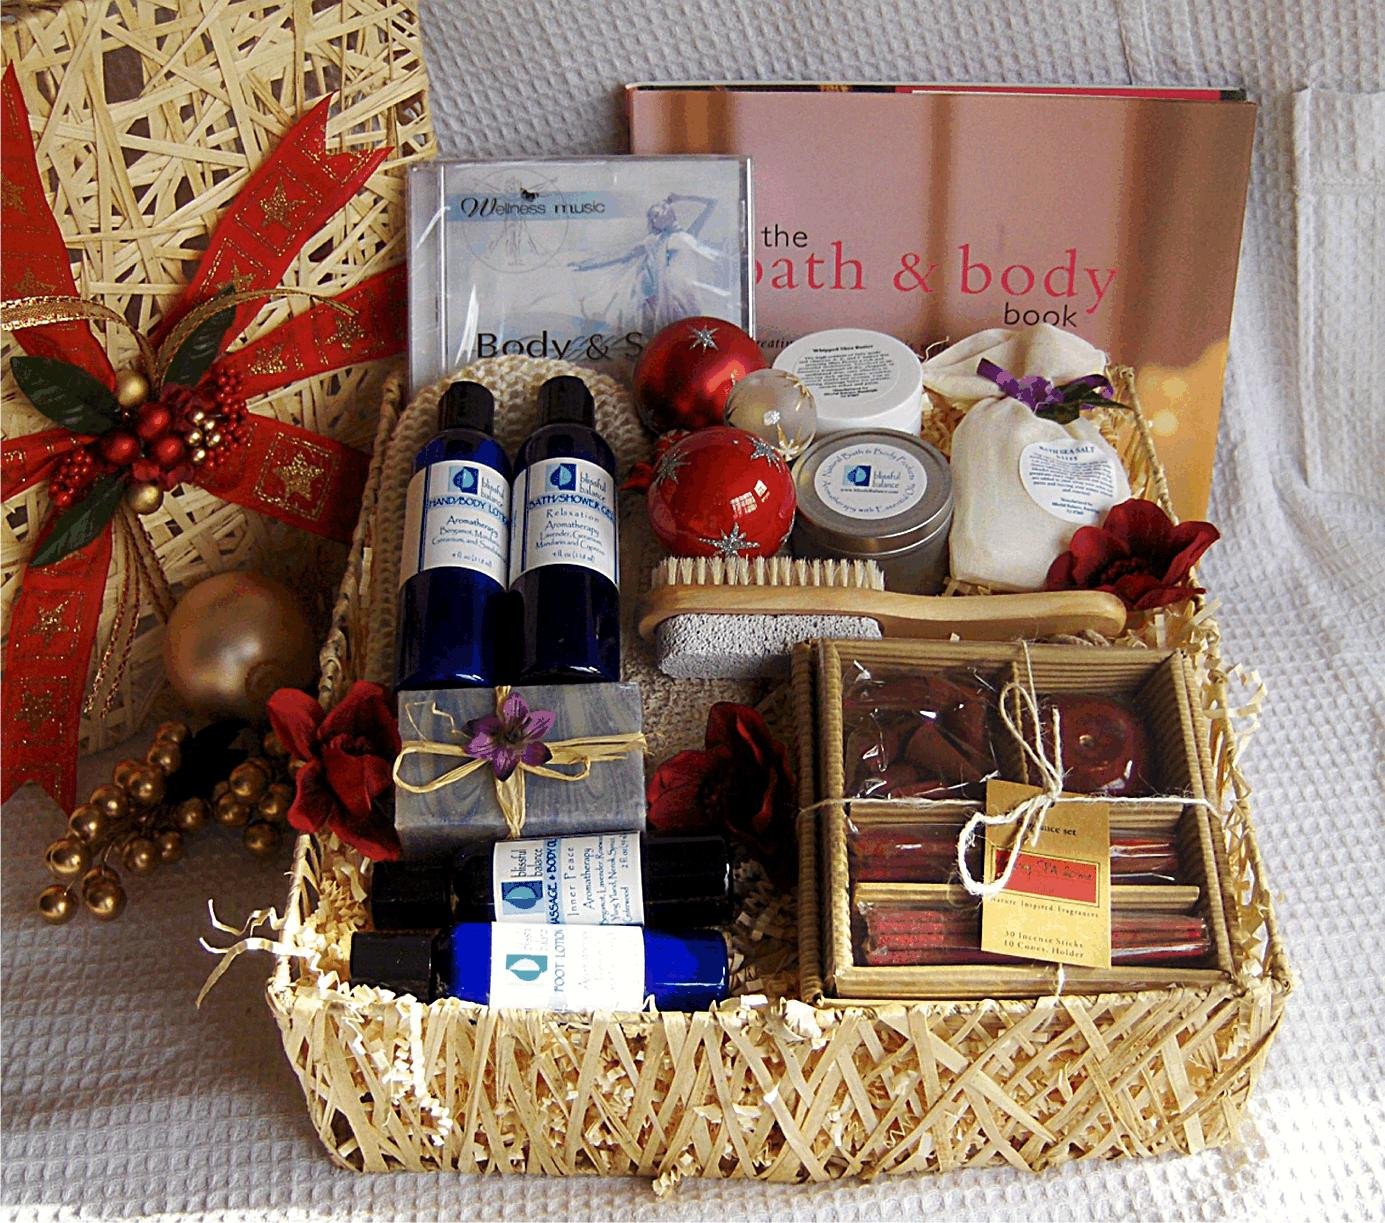 Christmas Basket Gift Ideas
 13 Gift Basket Ideas For Your Great Gifts Women wellness